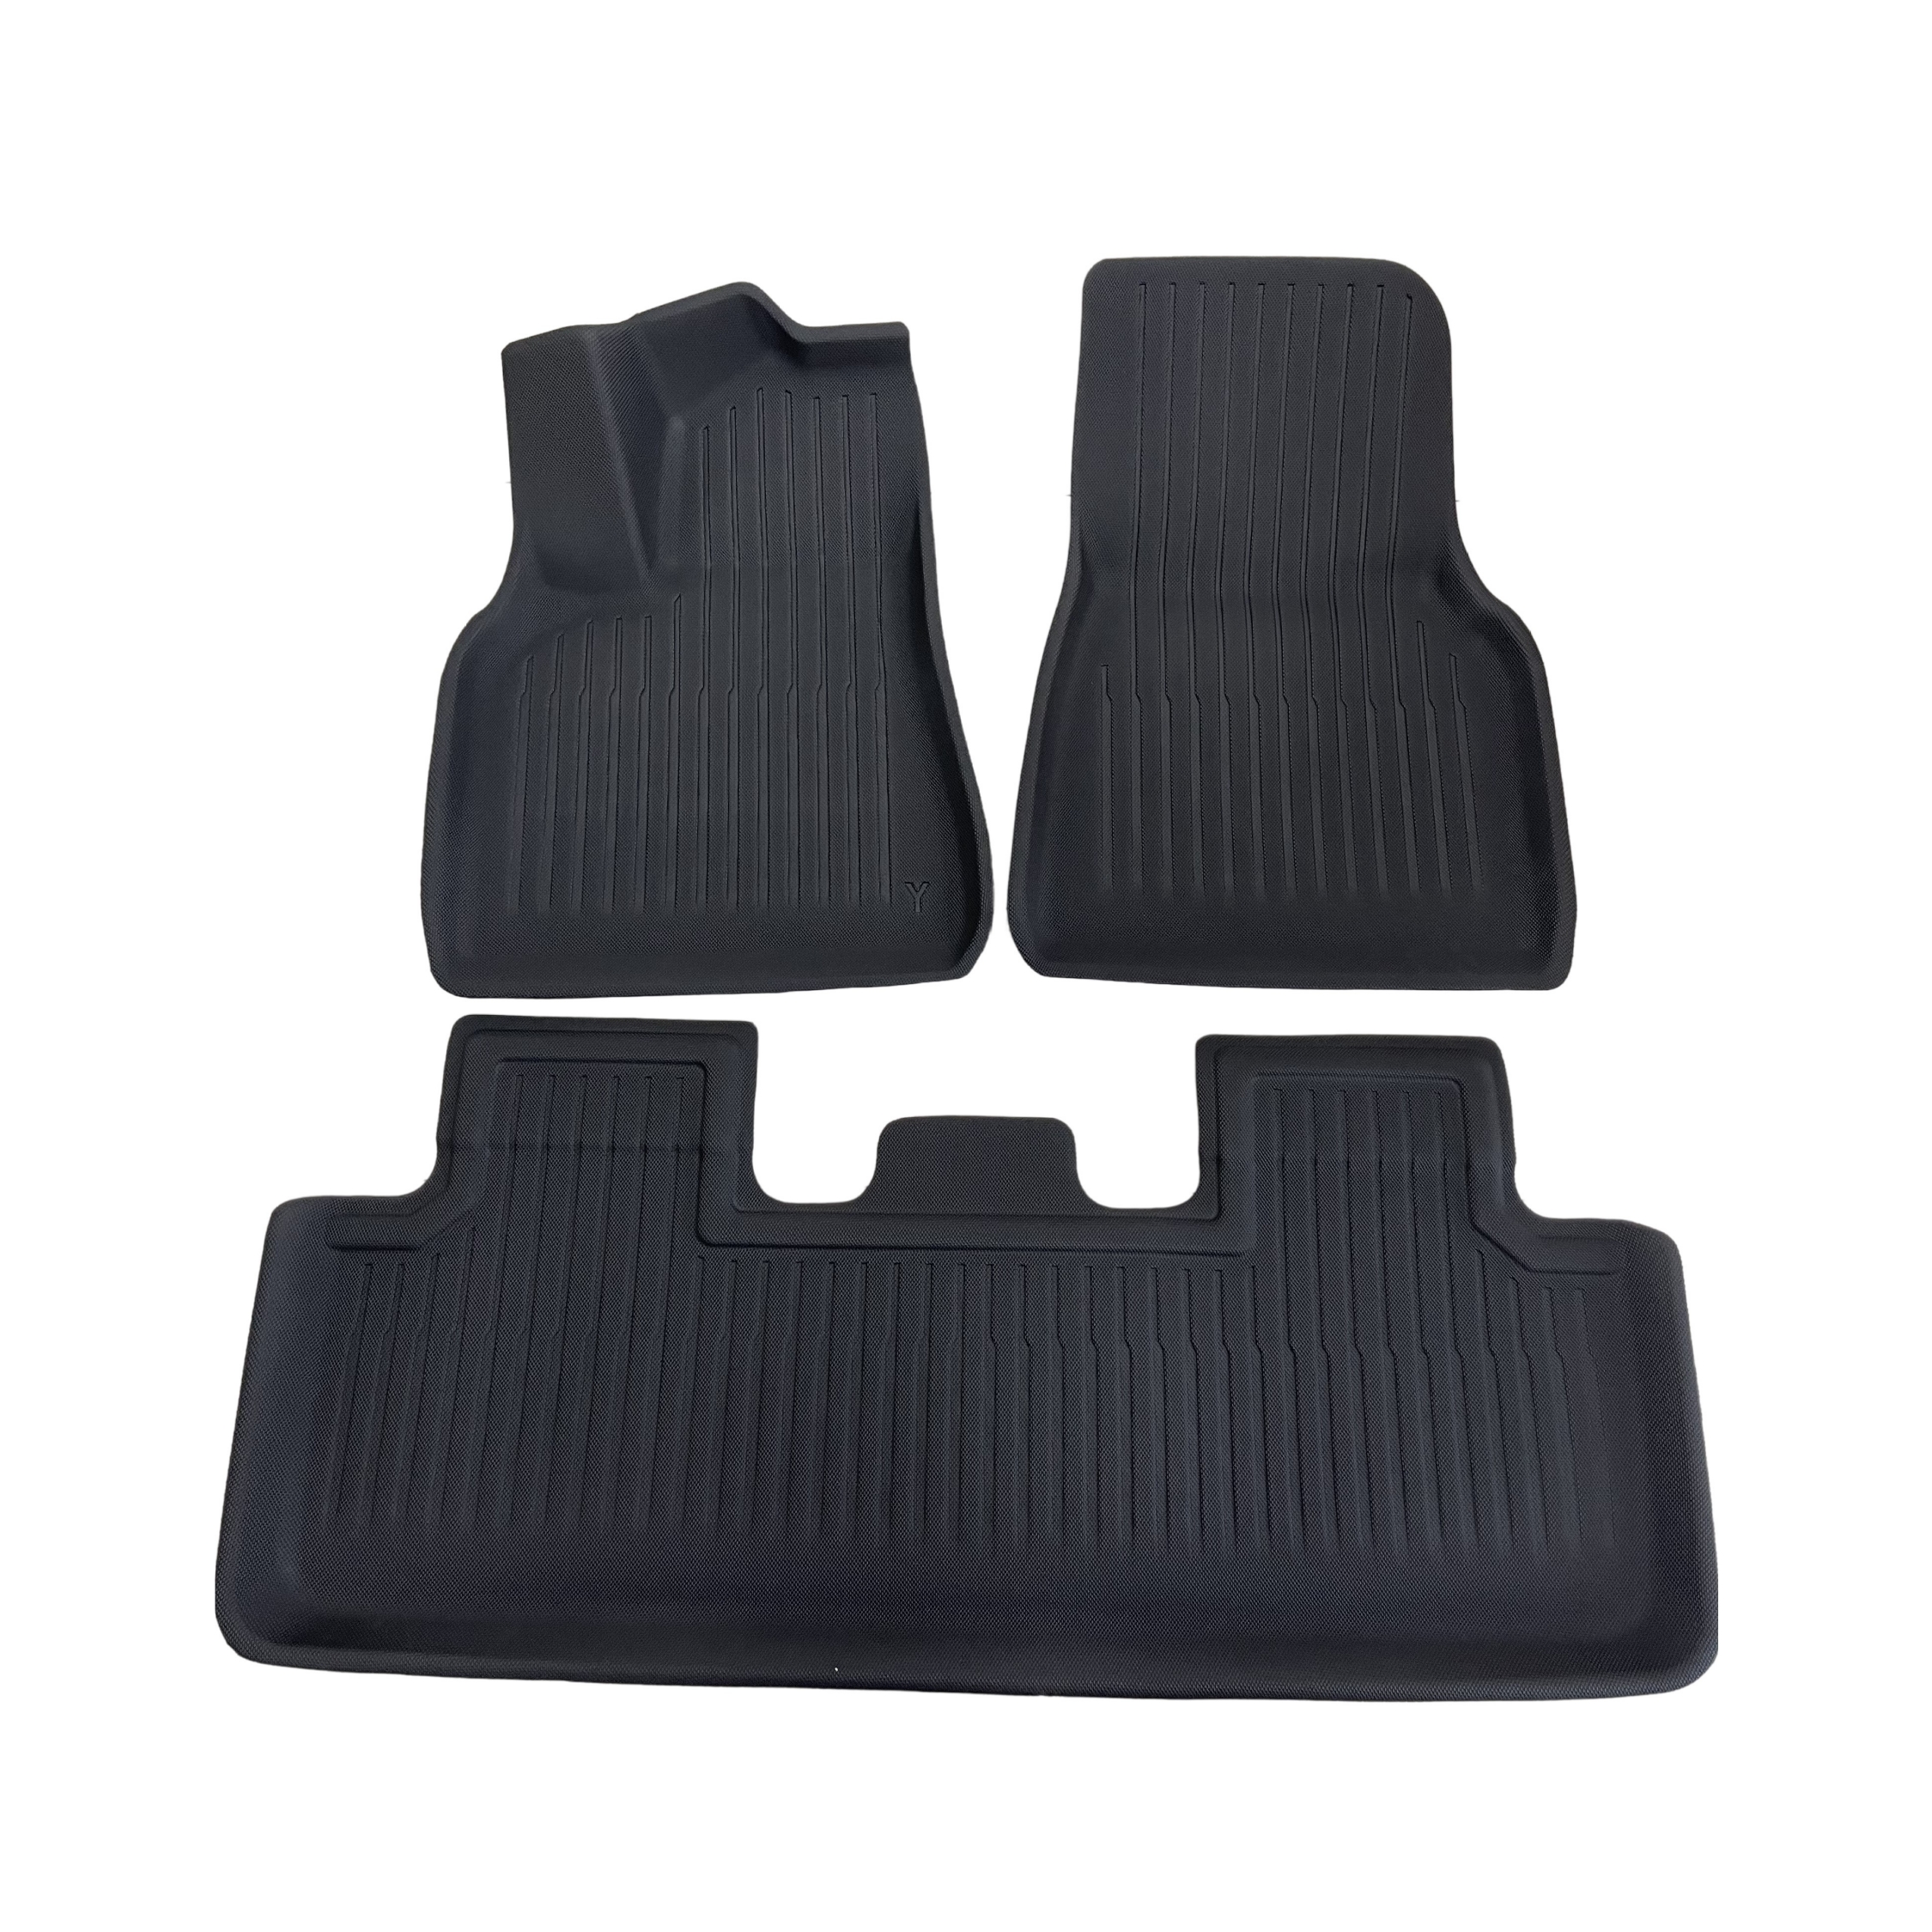 Protect Your Car's Interior with Customizable Floor Mats